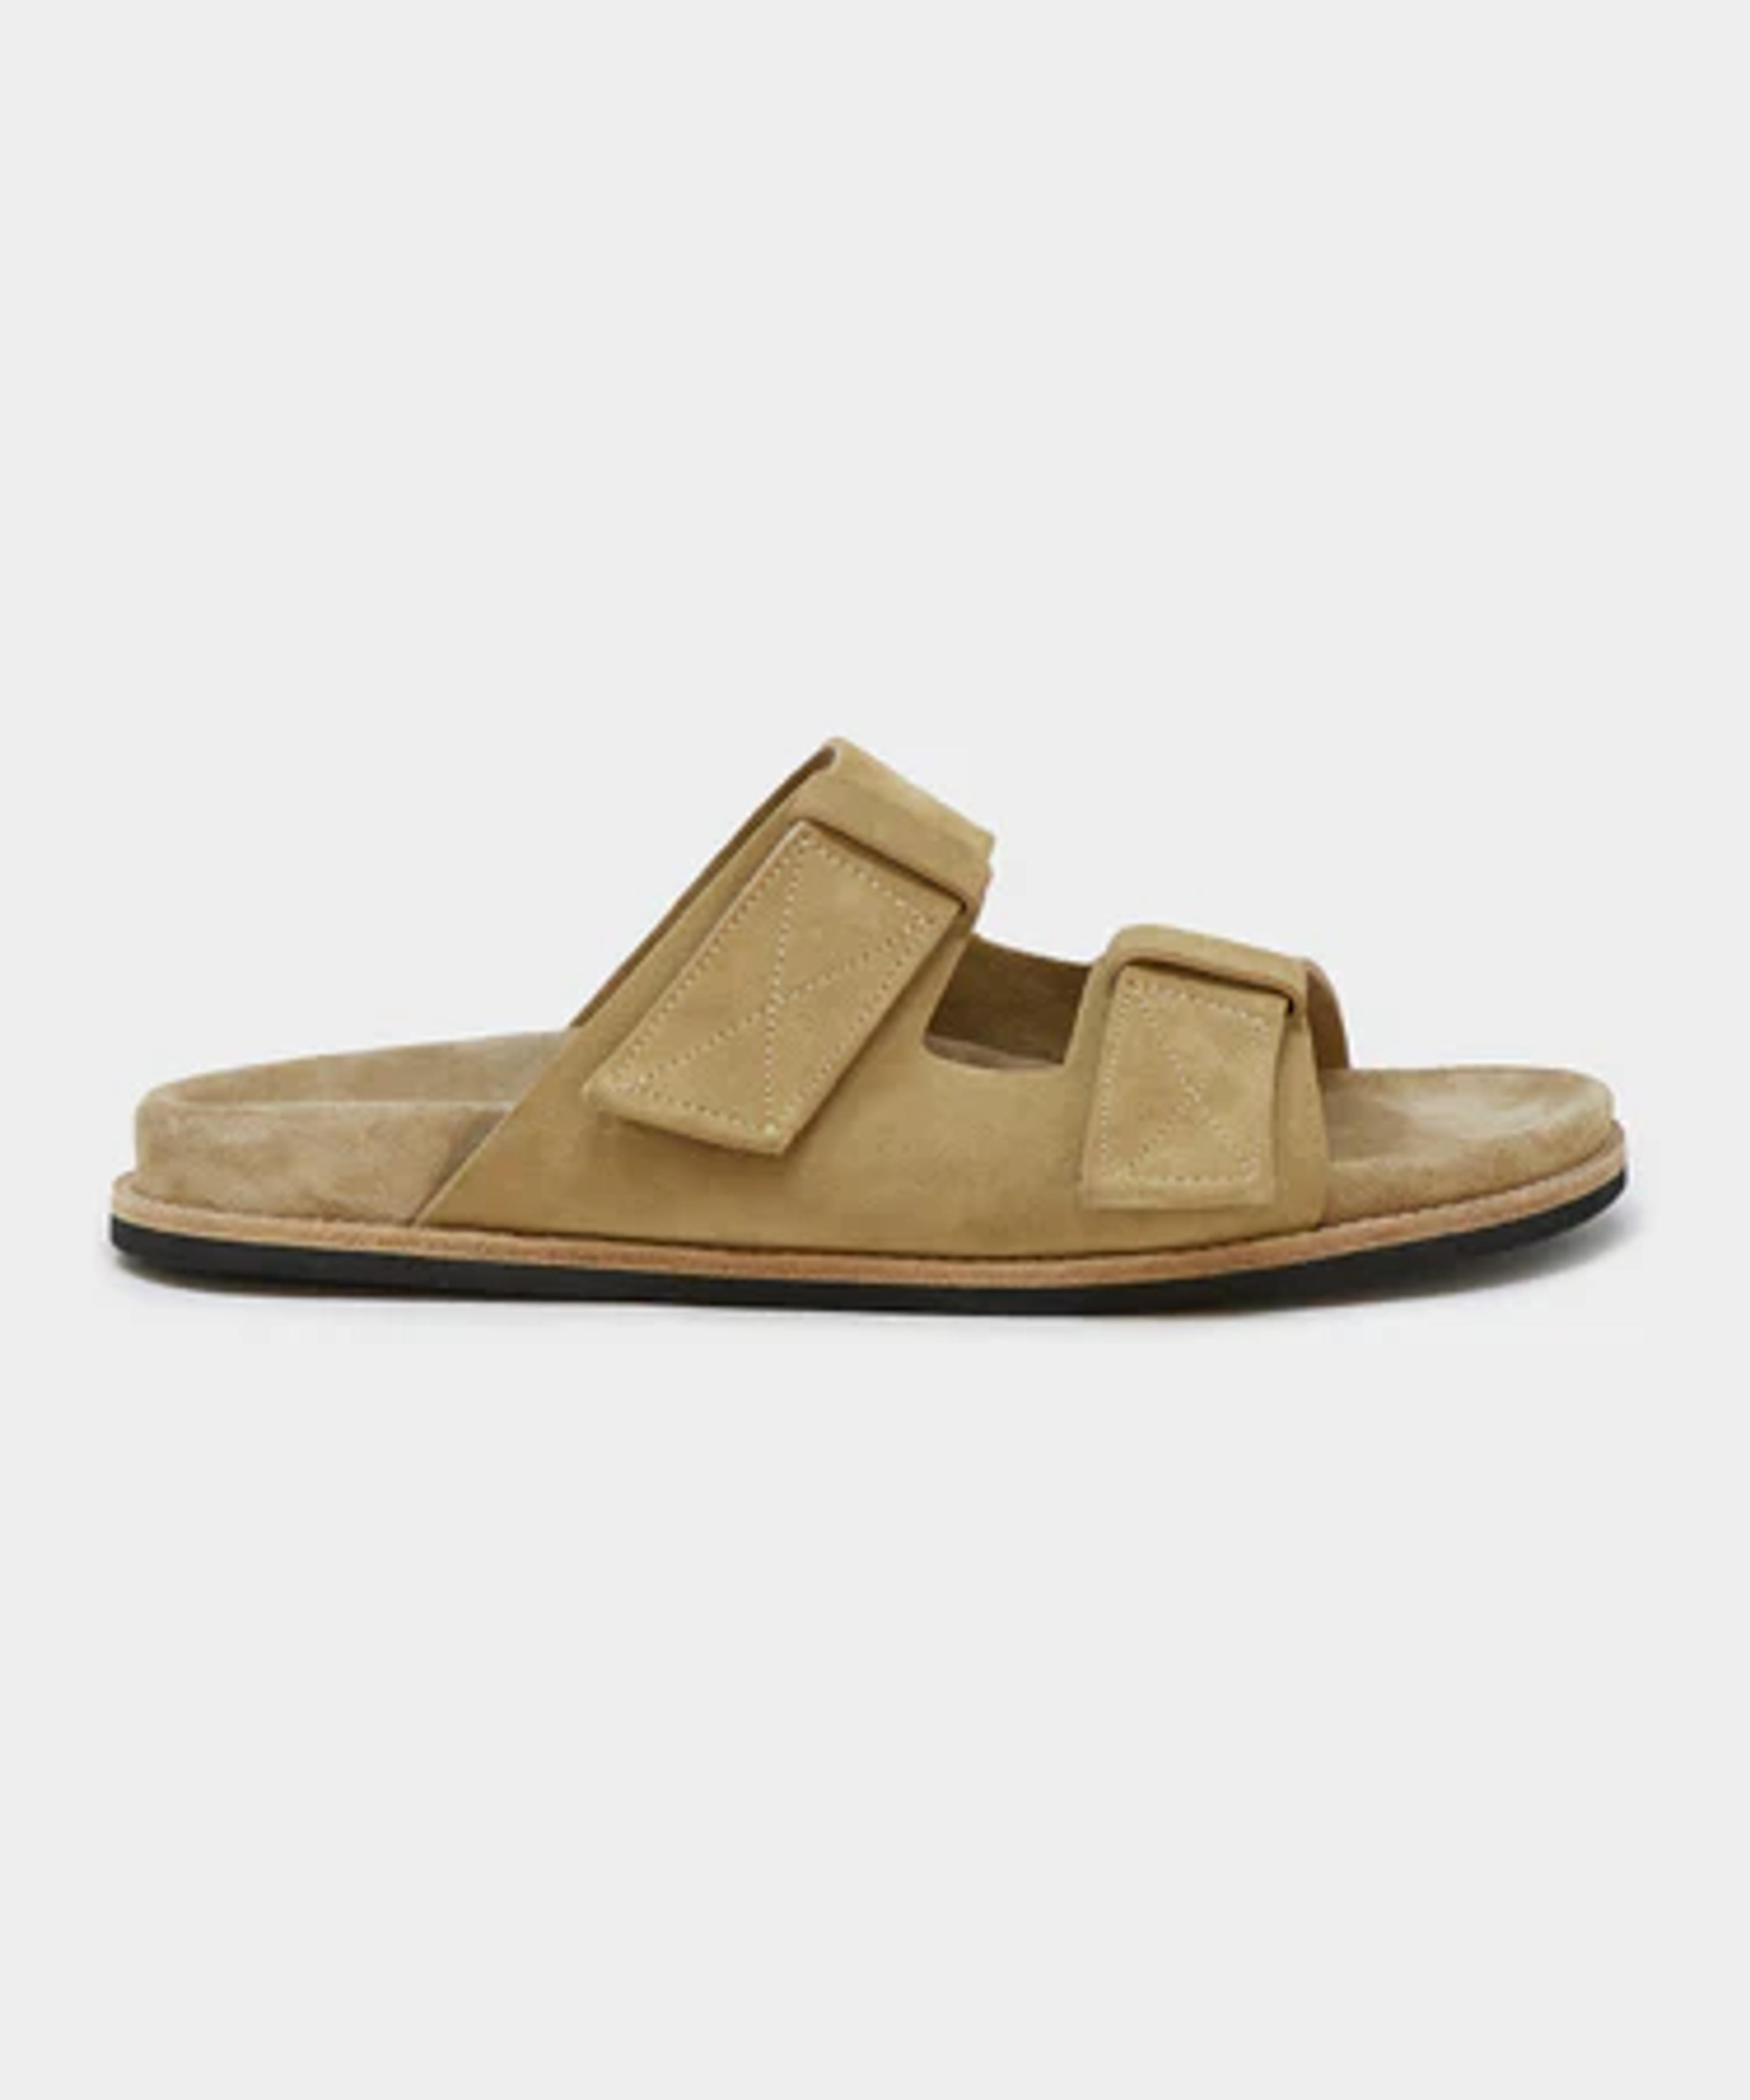 Todd Snyder Nomad Double Strap Sandal in Sand